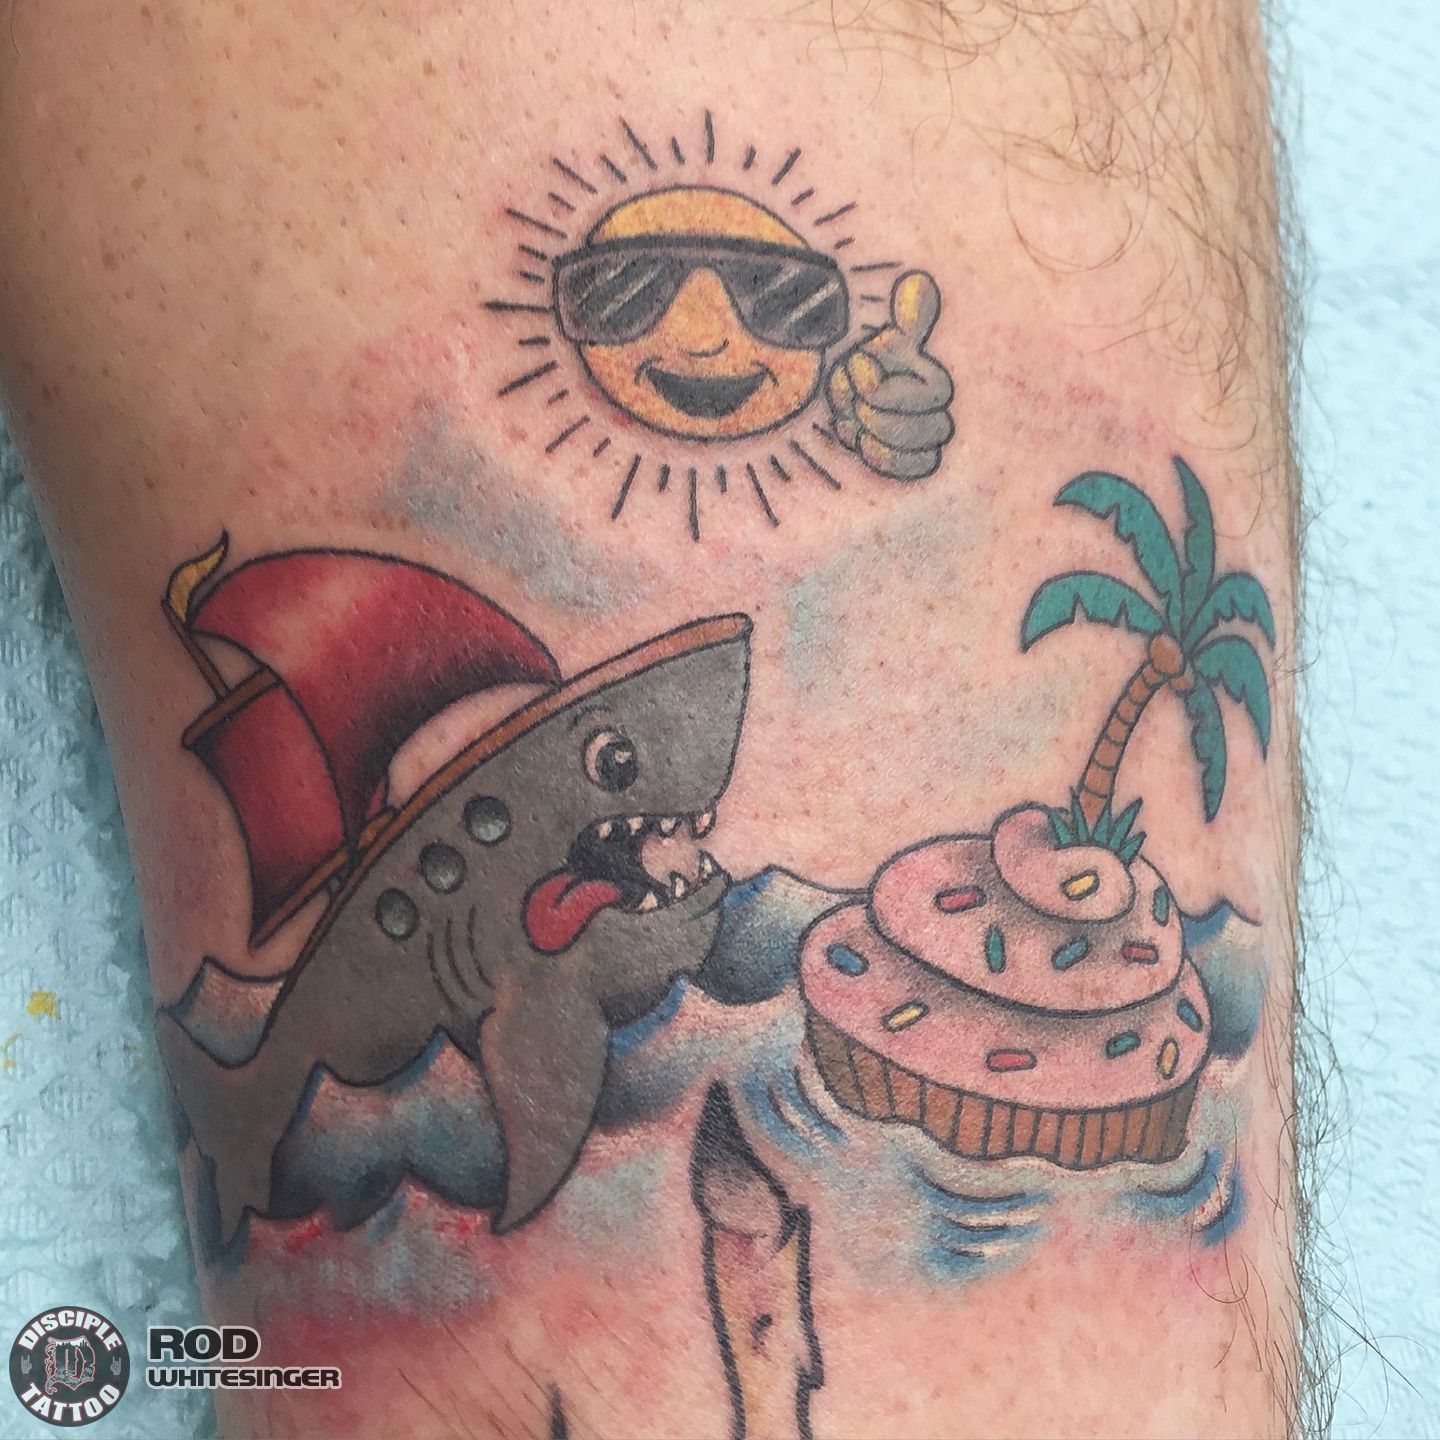 Fonzys Tattooing - Ballarat Tattoo Gallery Enter a world of urban  sophistication with this stunning black and grey tattoo! 🌴🌃 A mesmerizing  photo-realistic portrayal of a woman wearing sunglasses, as the reflection